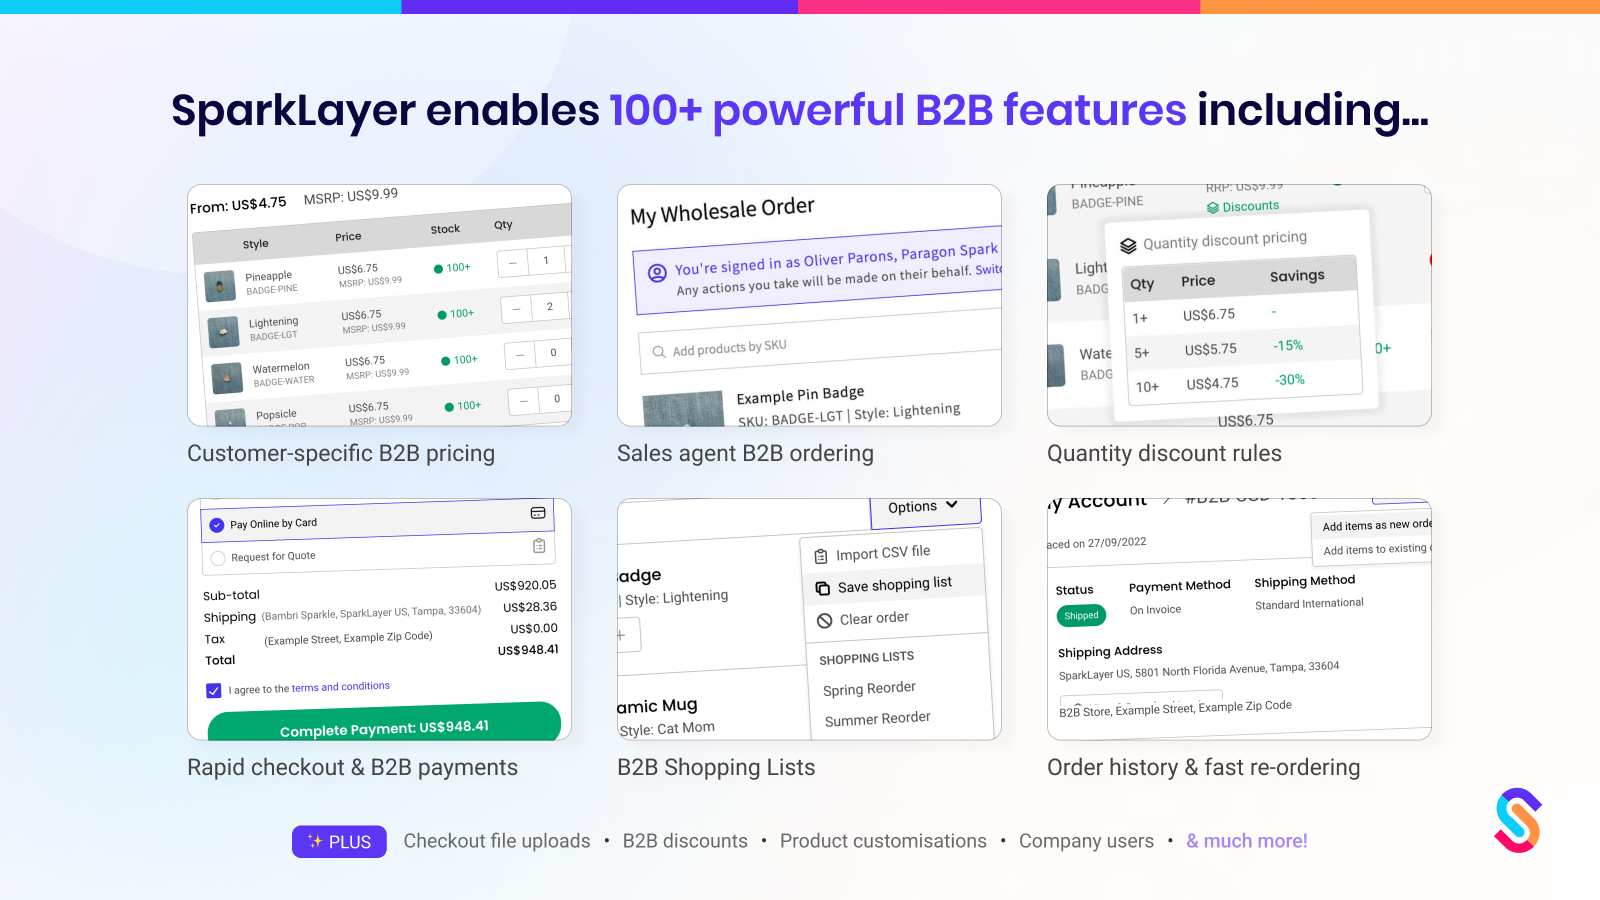 SparkLayer enables powerful B2B features on your Shopify store